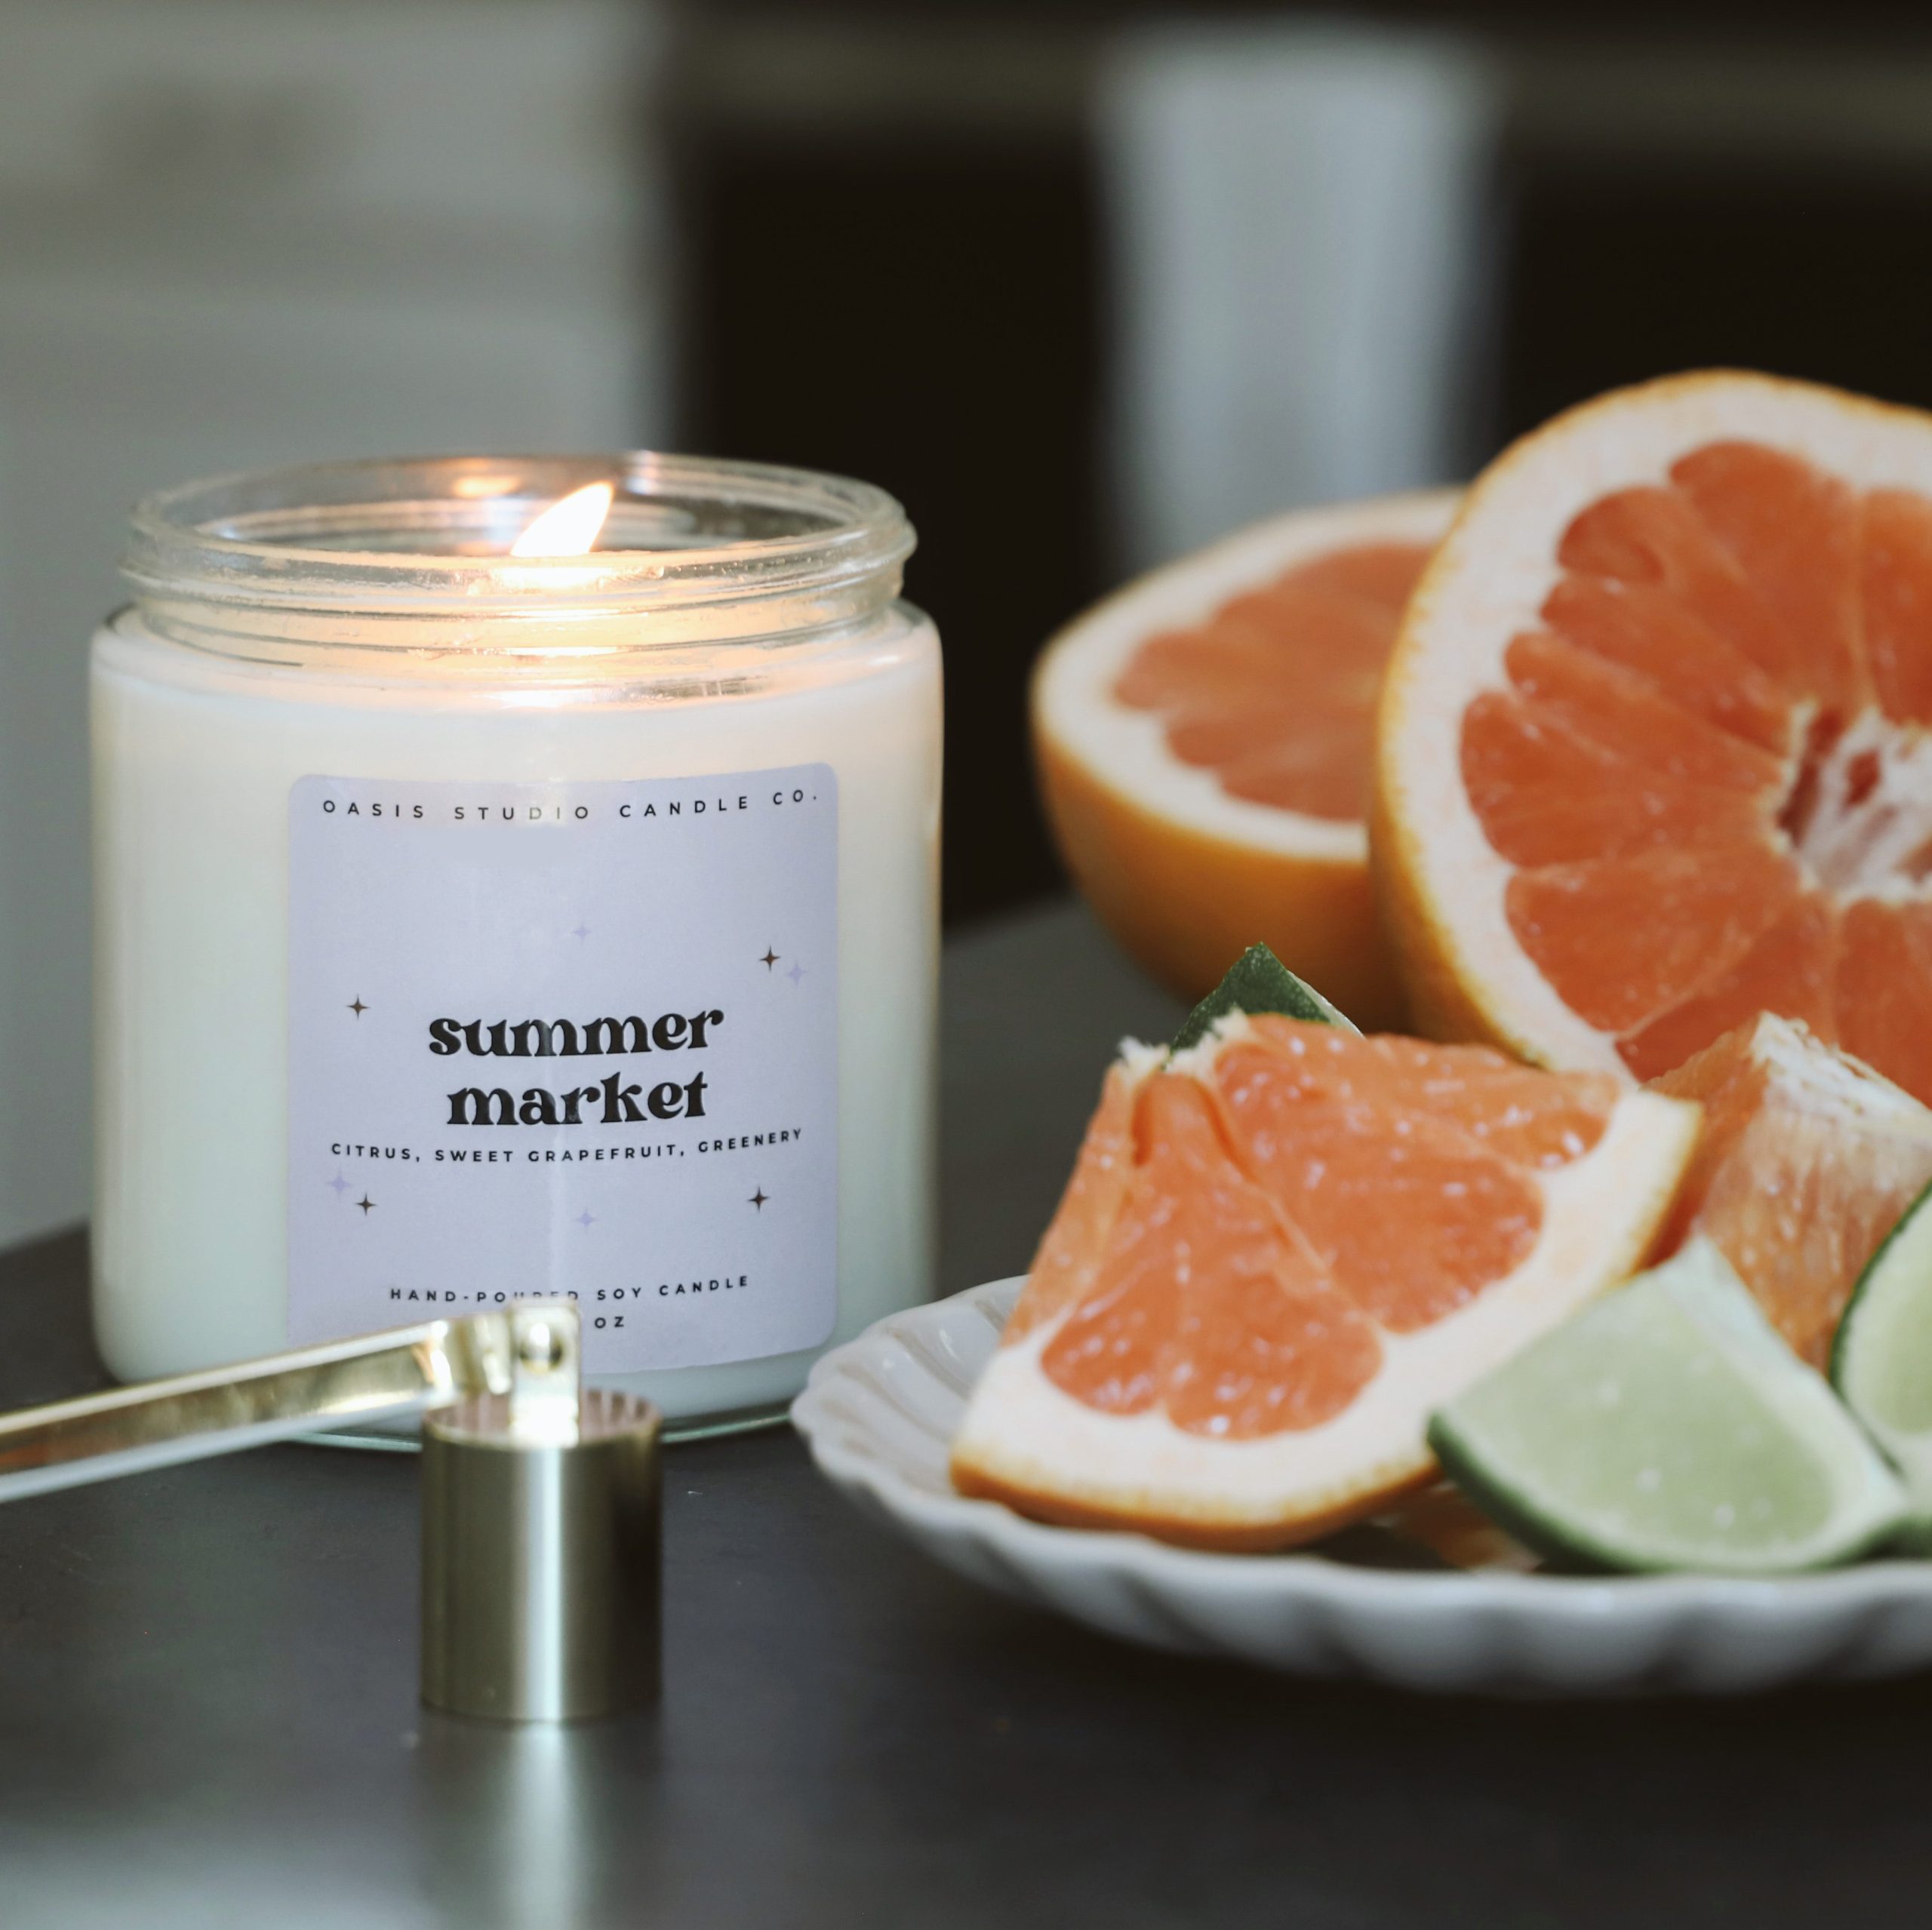 summer market candle by oasis studio featured in vellabox